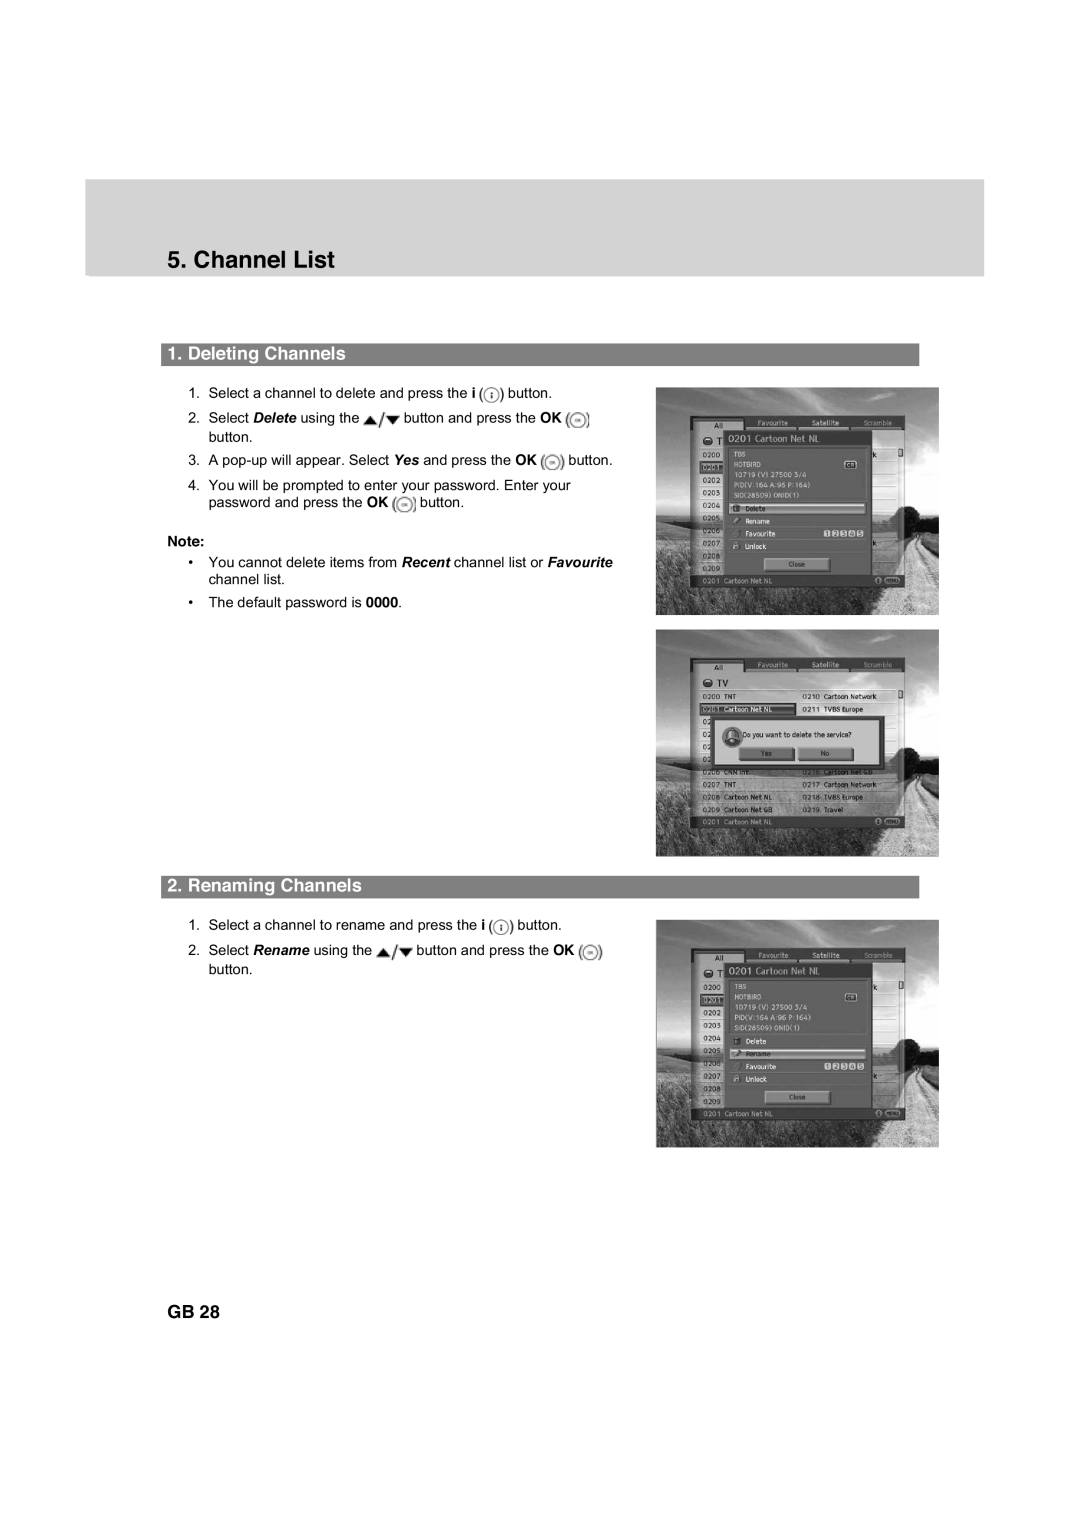 Humax HDCI-2000 manual Deleting Channels, Renaming Channels, Channel List 